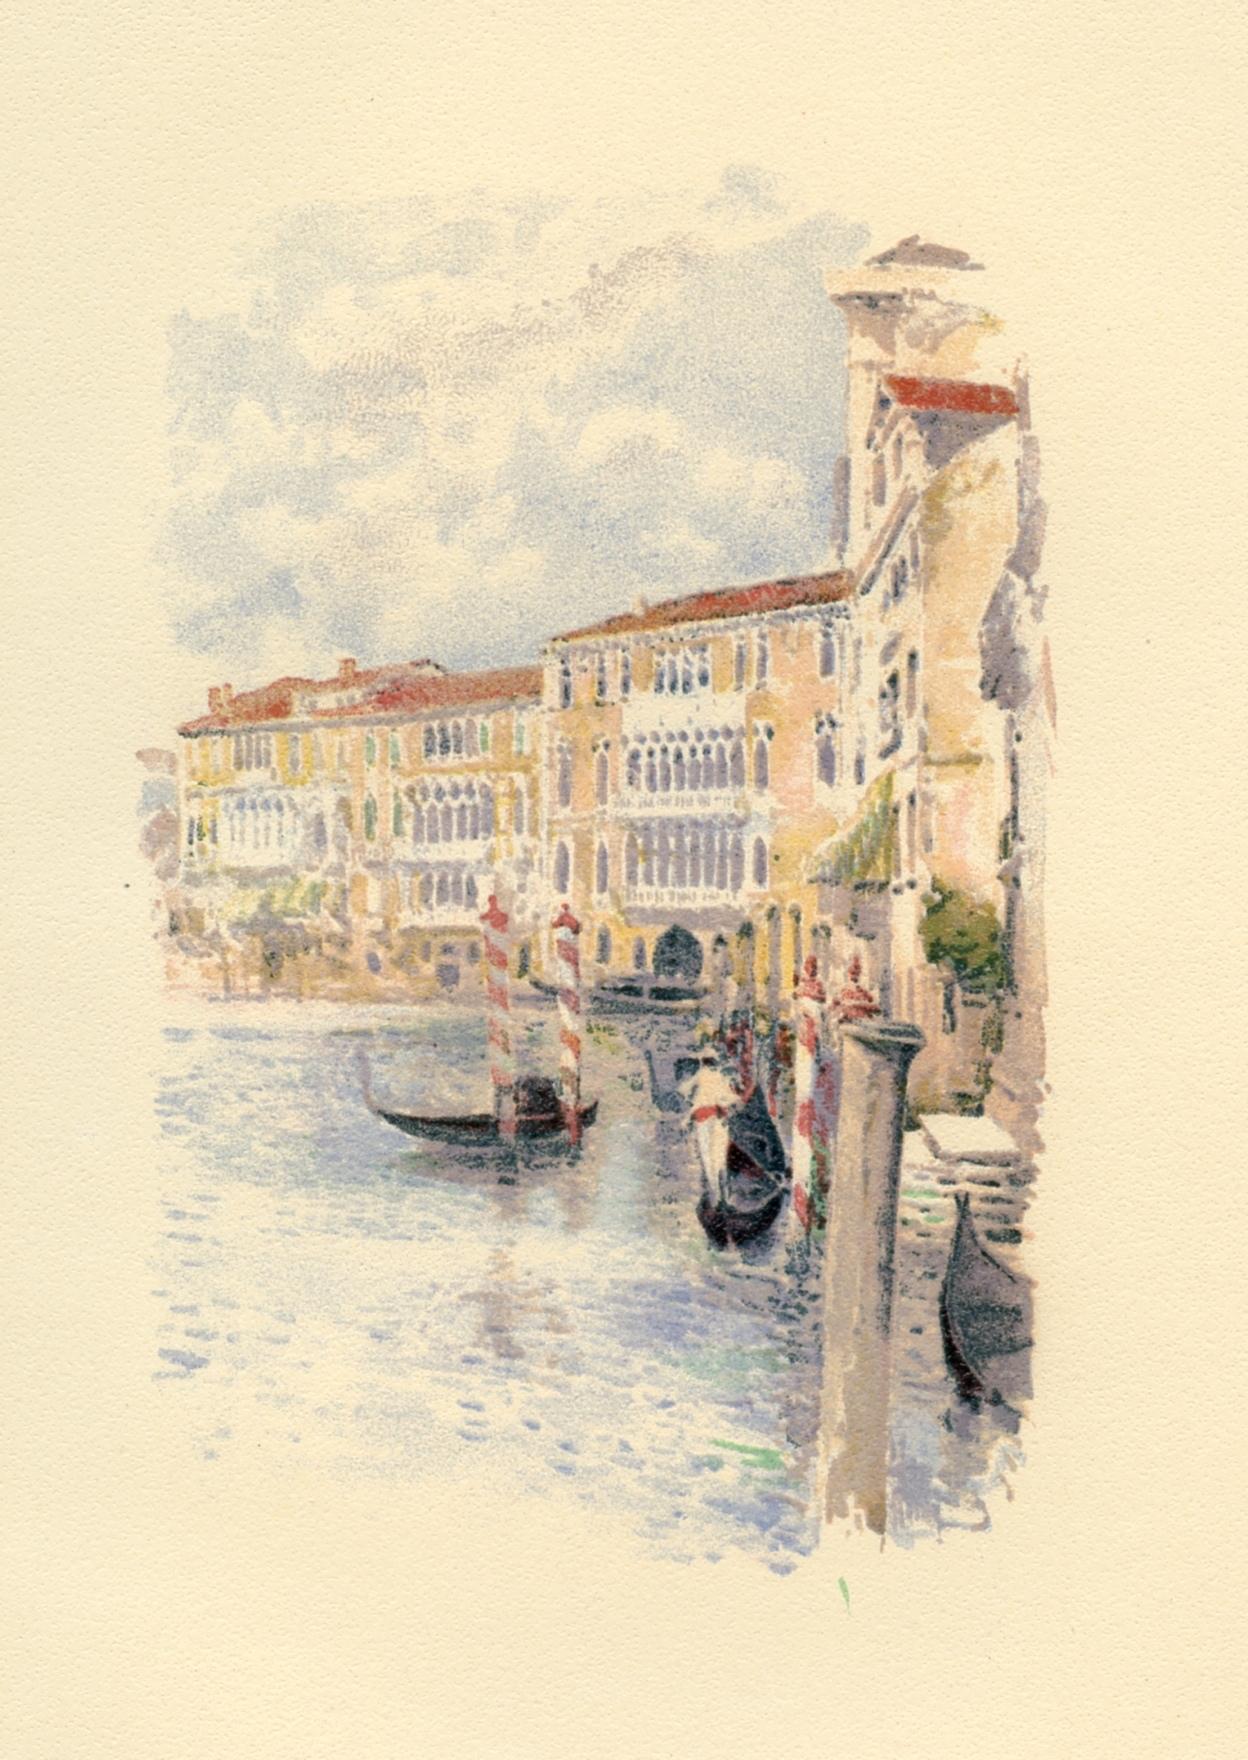 Medium: chromolithograph (after the watercolor). This delightful antique lithograph was published in a small edition in 1892 to illustrate a rare volume with scenes of Venetian life. A beautiful, richly inked impression on cream wove paper. Image